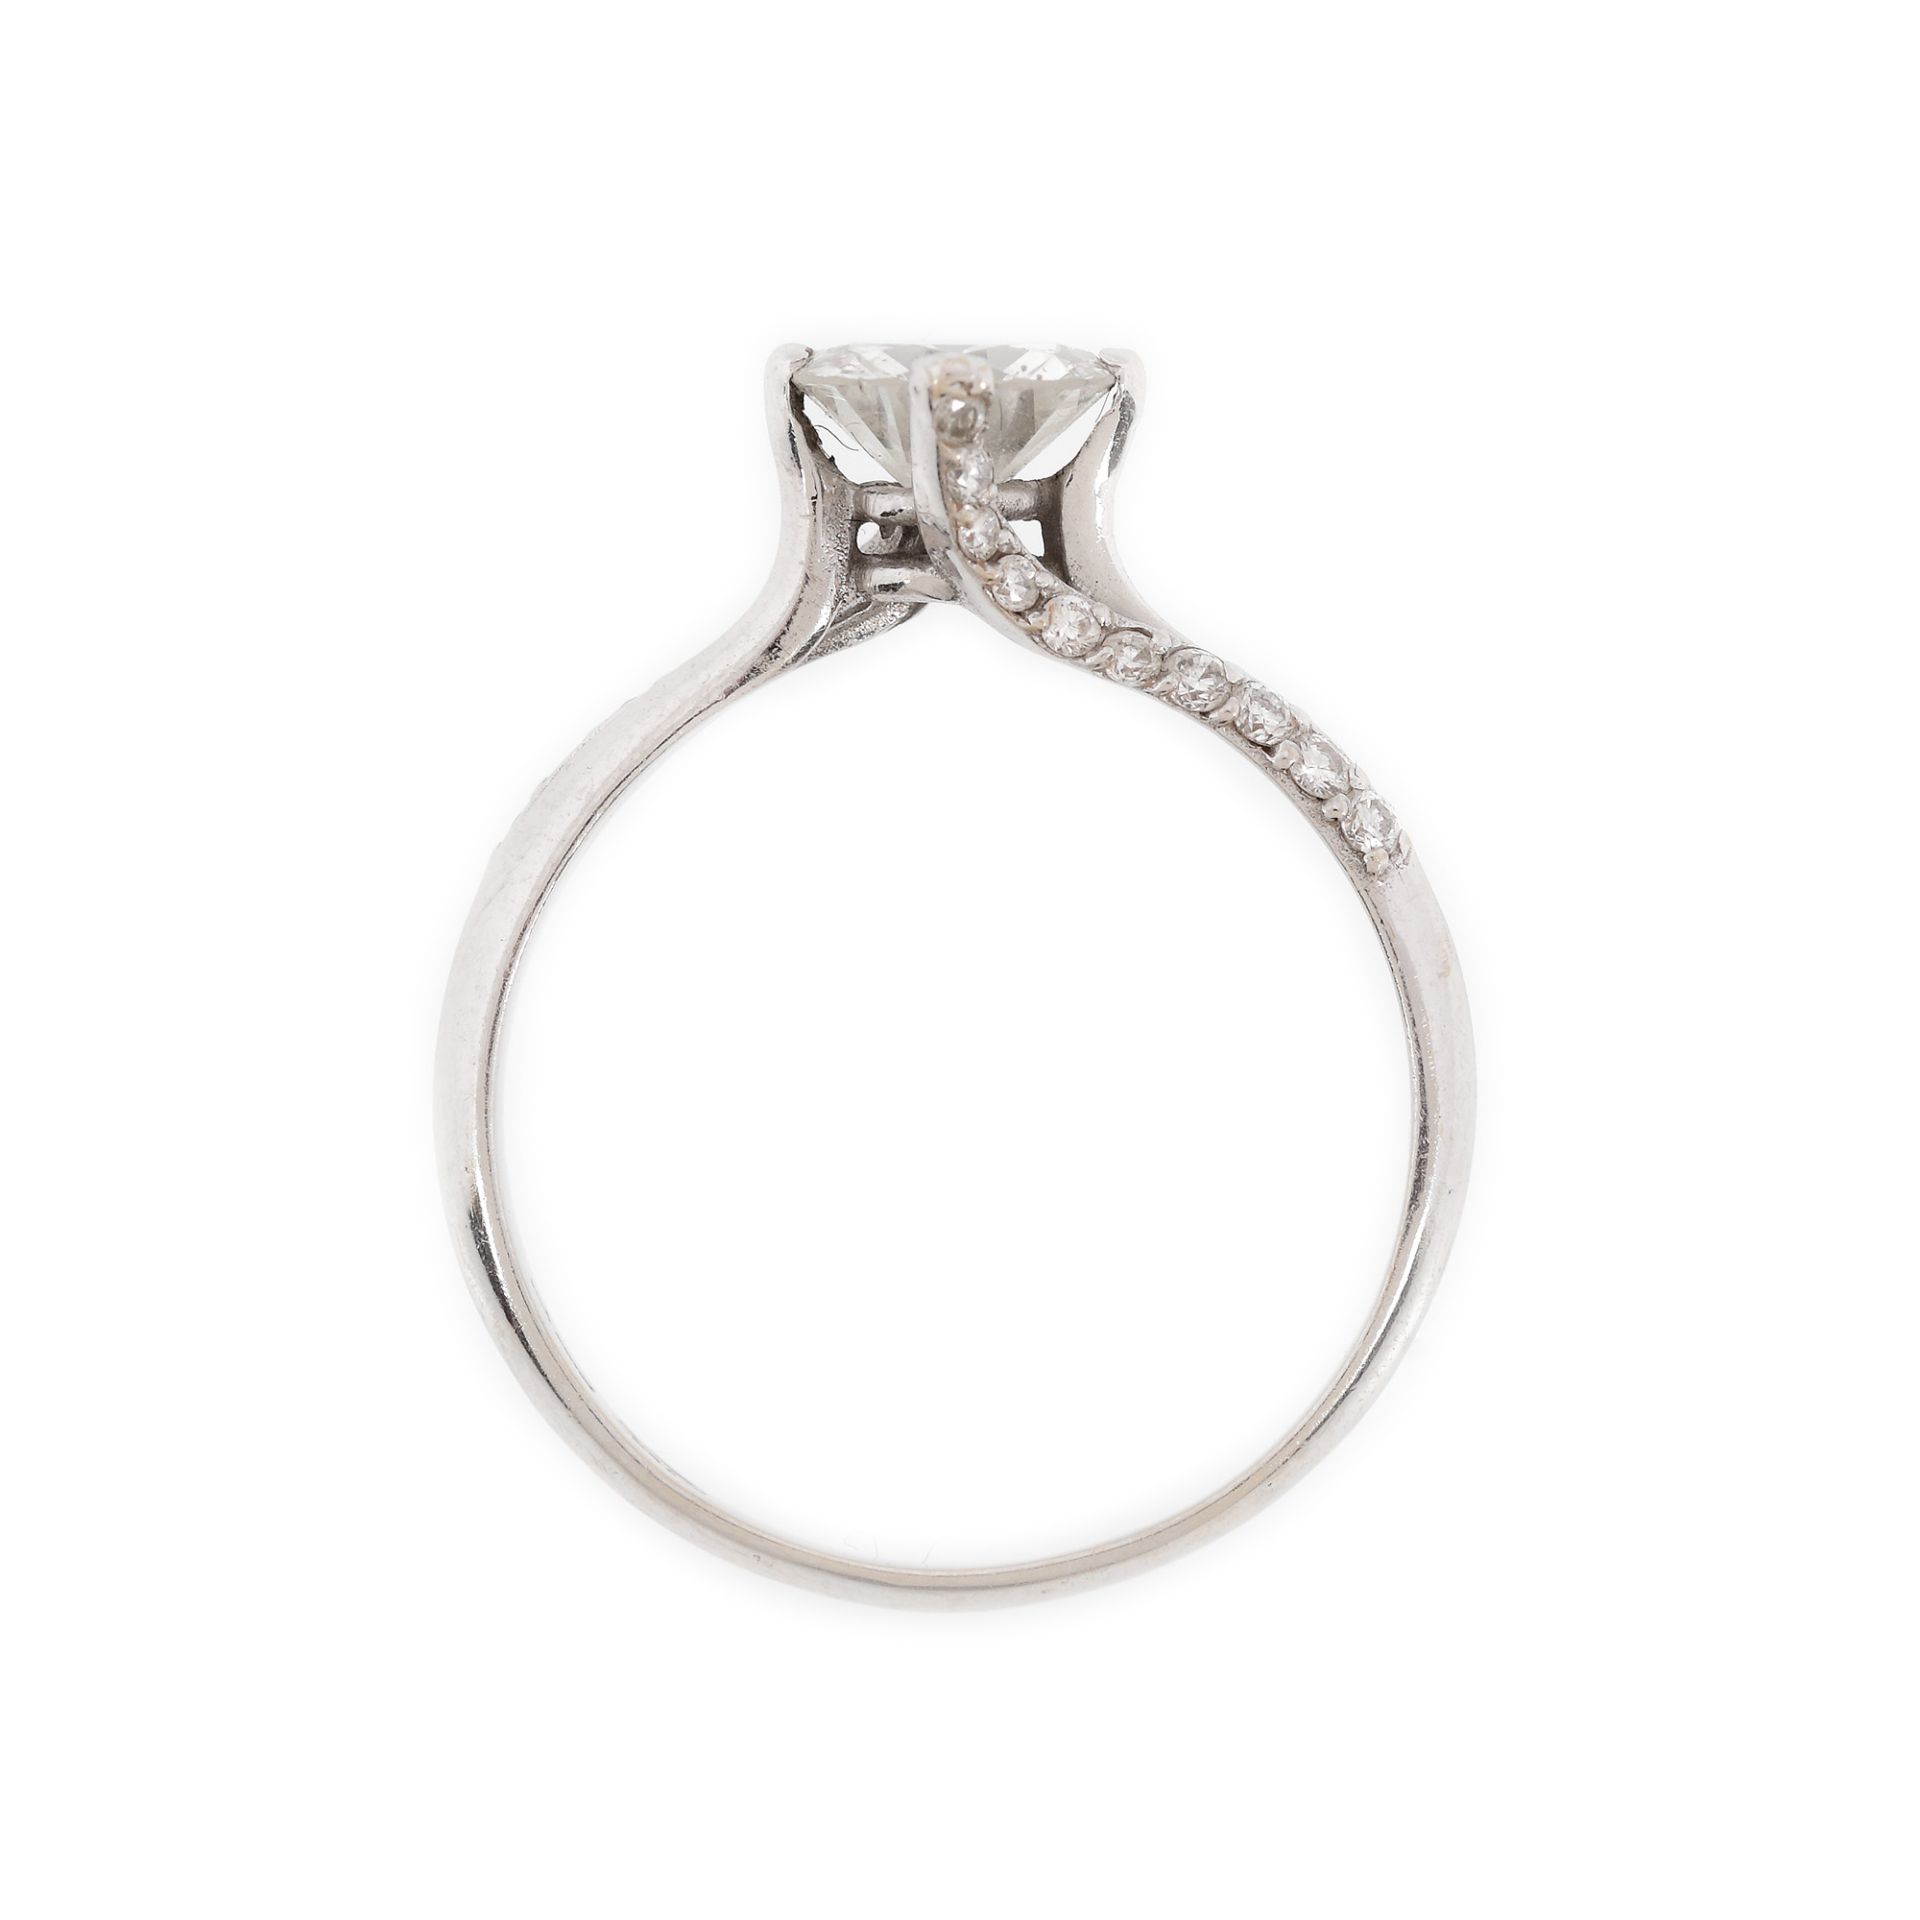 White gold ring, centrally decorated with a diamond and paved with diamonds - Image 3 of 3